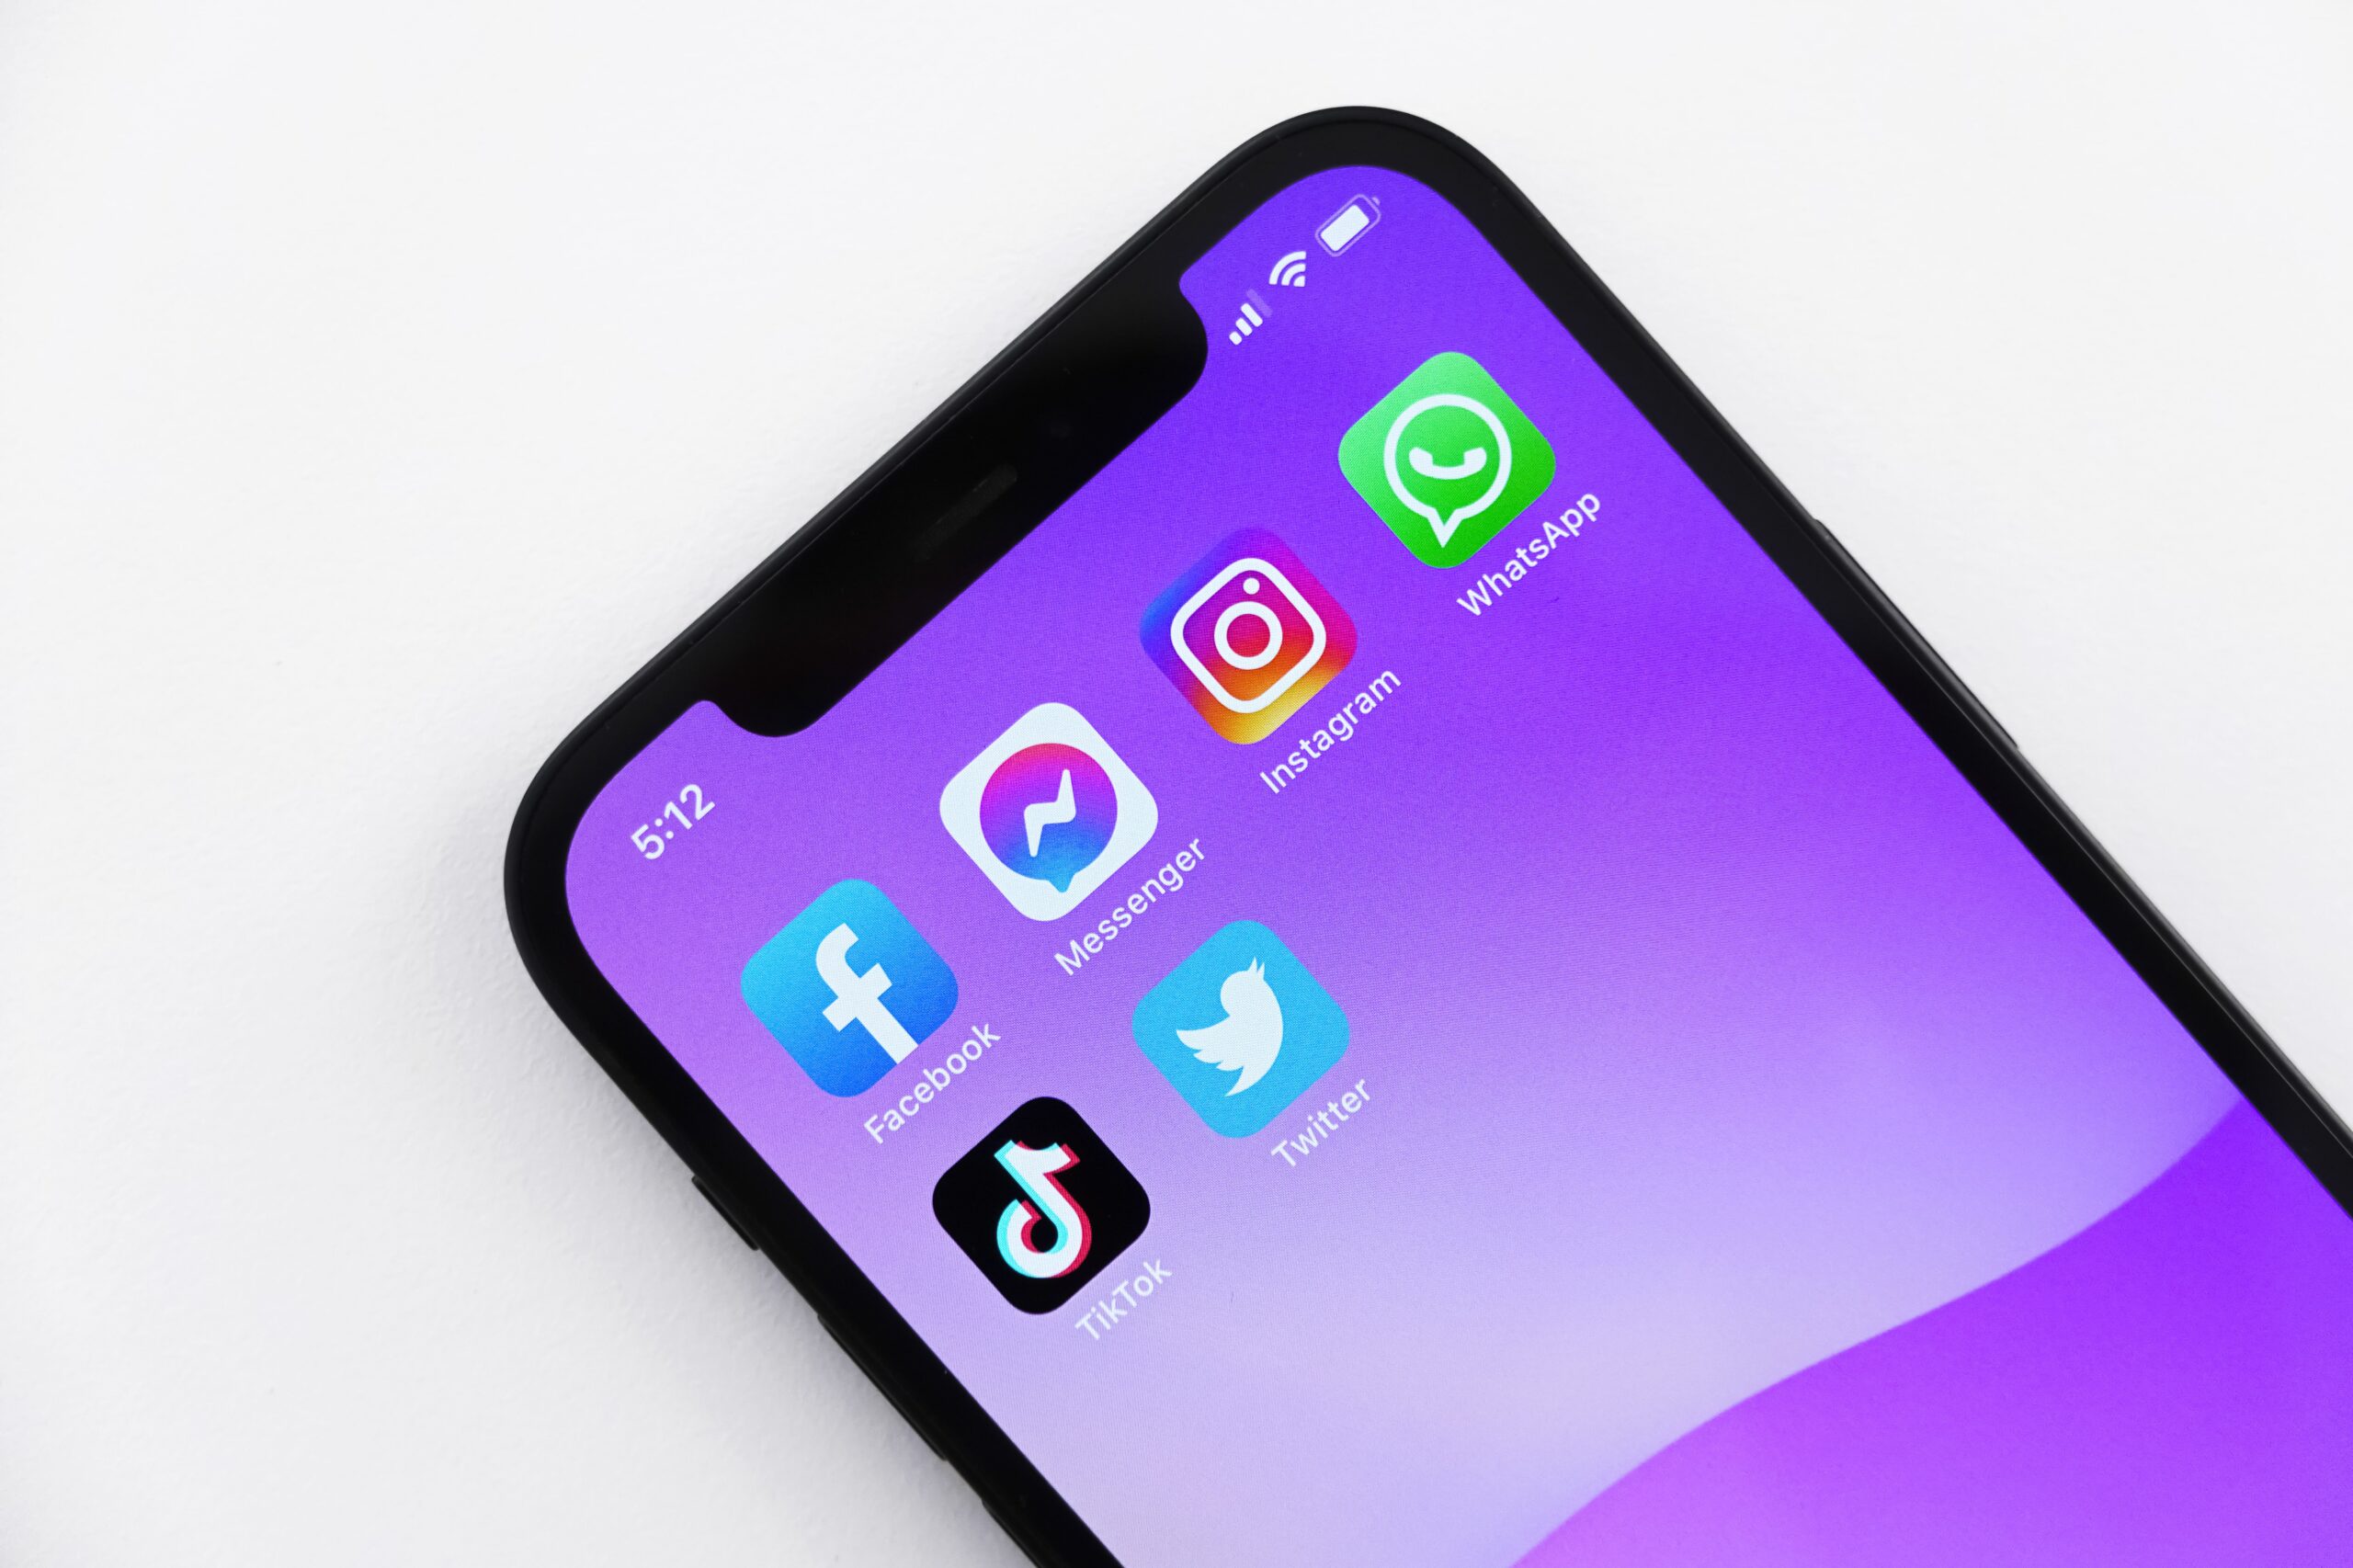 Close-up of a smartphone screen displaying icons of social media platforms including Facebook, Messenger, Instagram, Twitter, TikTok, and WhatsApp on a purple background.